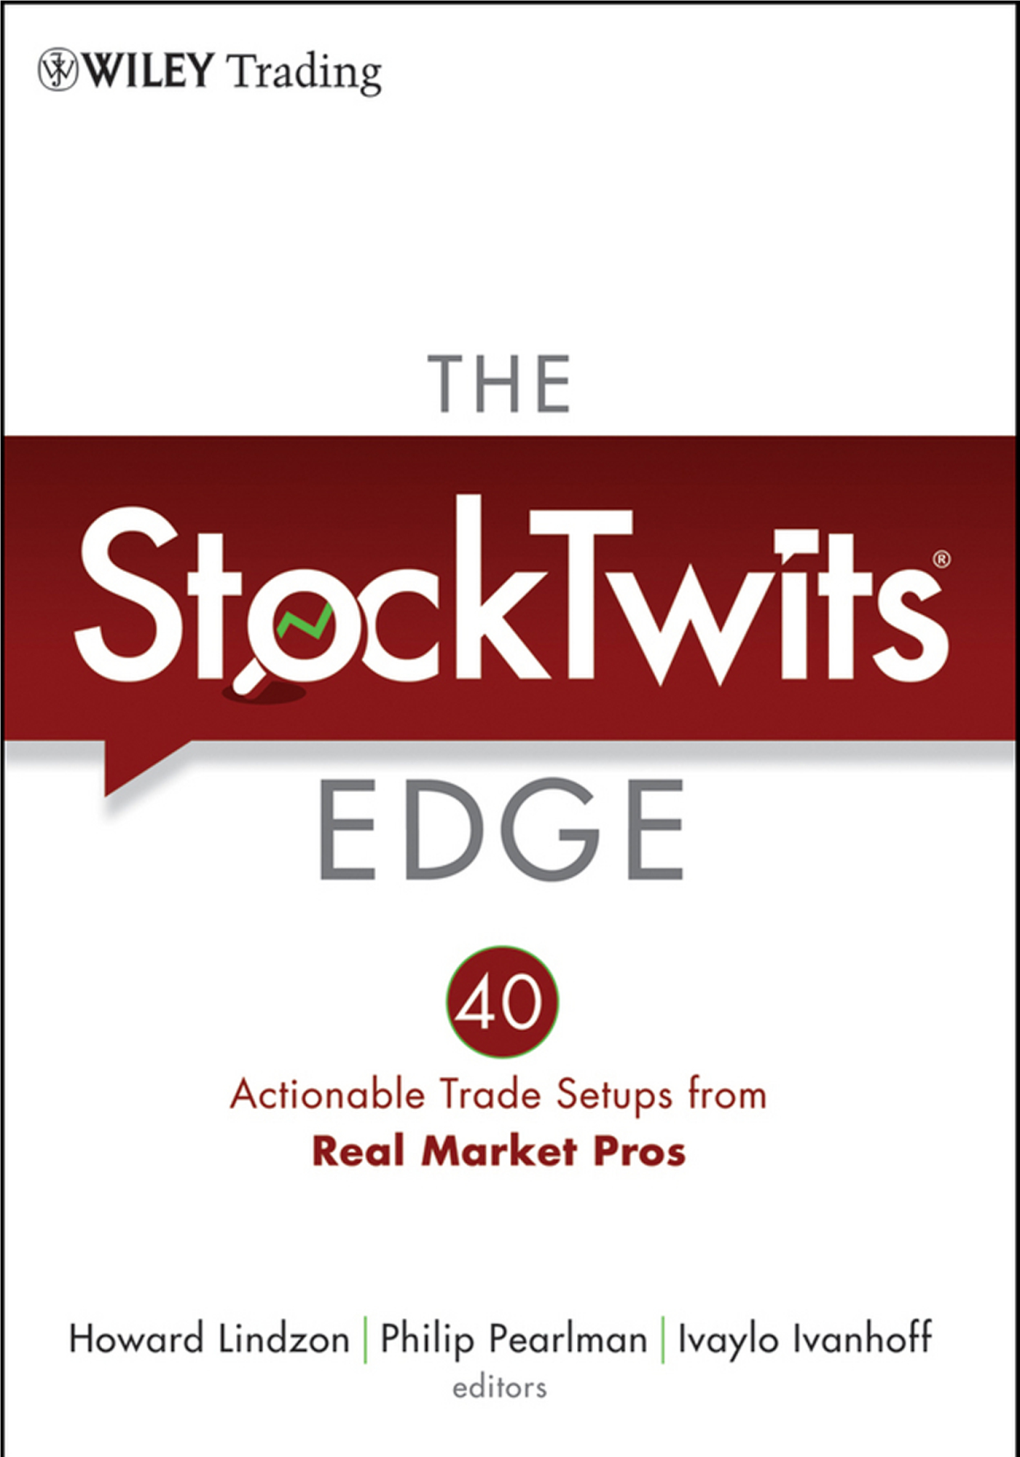 The Stocktwits Edge : 40 Actionable Trade Setups from Real Market Pros / Howard Lindzon, Philip Pearlman, Ivaylo Ivanhoff